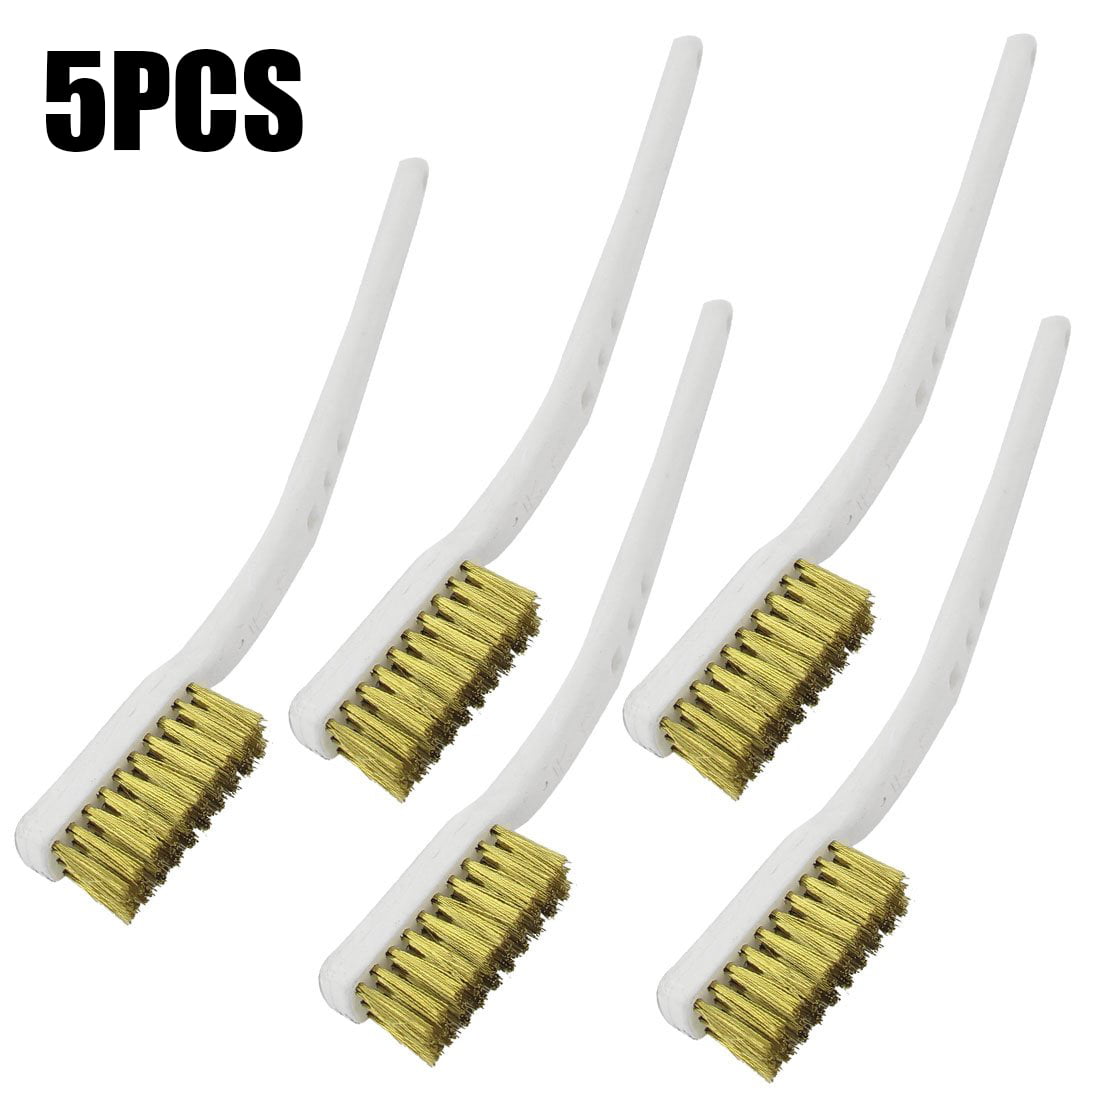 5PCS Plastic Handle Brass Wire-Brush For Industrial Devices Polishing Cleaning 